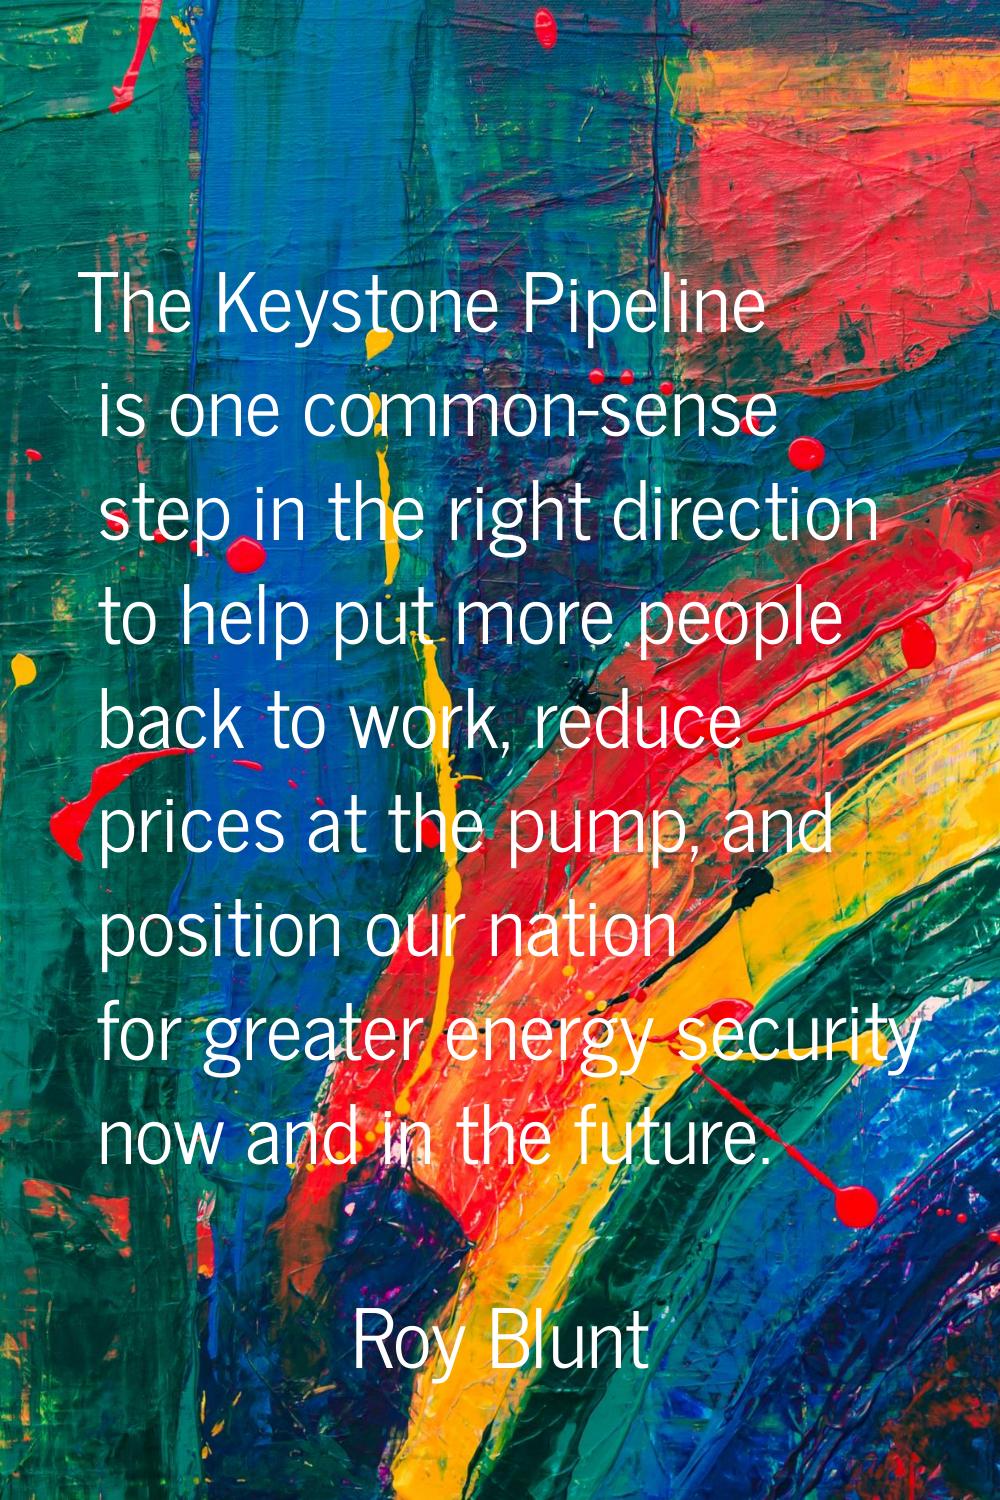 The Keystone Pipeline is one common-sense step in the right direction to help put more people back 